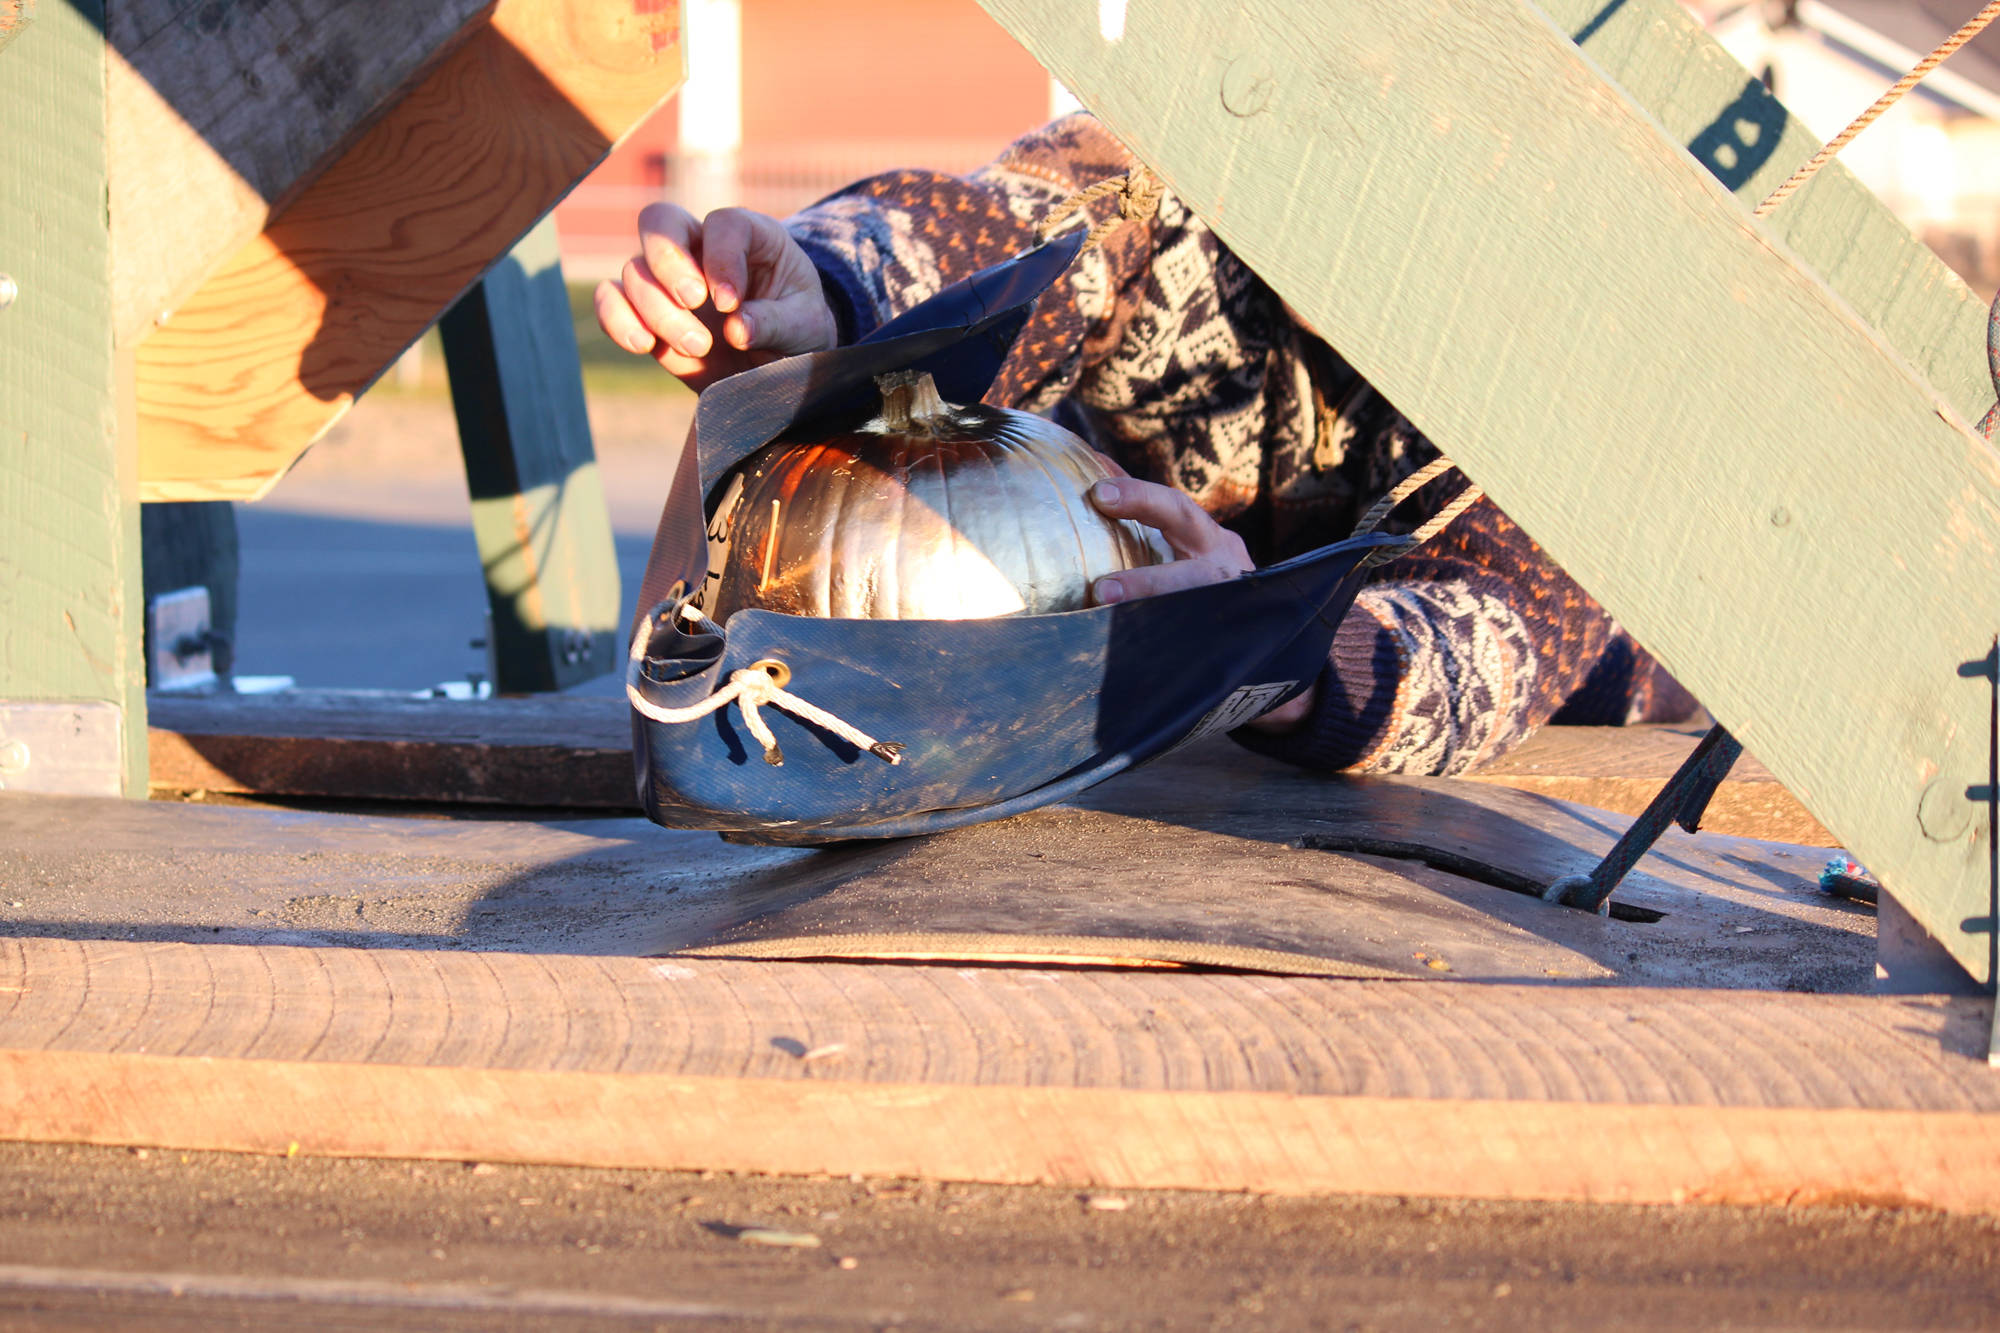 A volunteer laods the golden pumpkin into a large home-made catapult to be launched during West Homer Elementary School’s annual Punkin Cuckin’ event Friday, Nov. 3, 2017 at the school in Homer, Alaska. The catapult, on its second year of use, was put under too much stress this year, and the event had to be stopped before all the pumpkins were thrown for fear of it breaking. (Photo by Megan Pacer/Homer News)